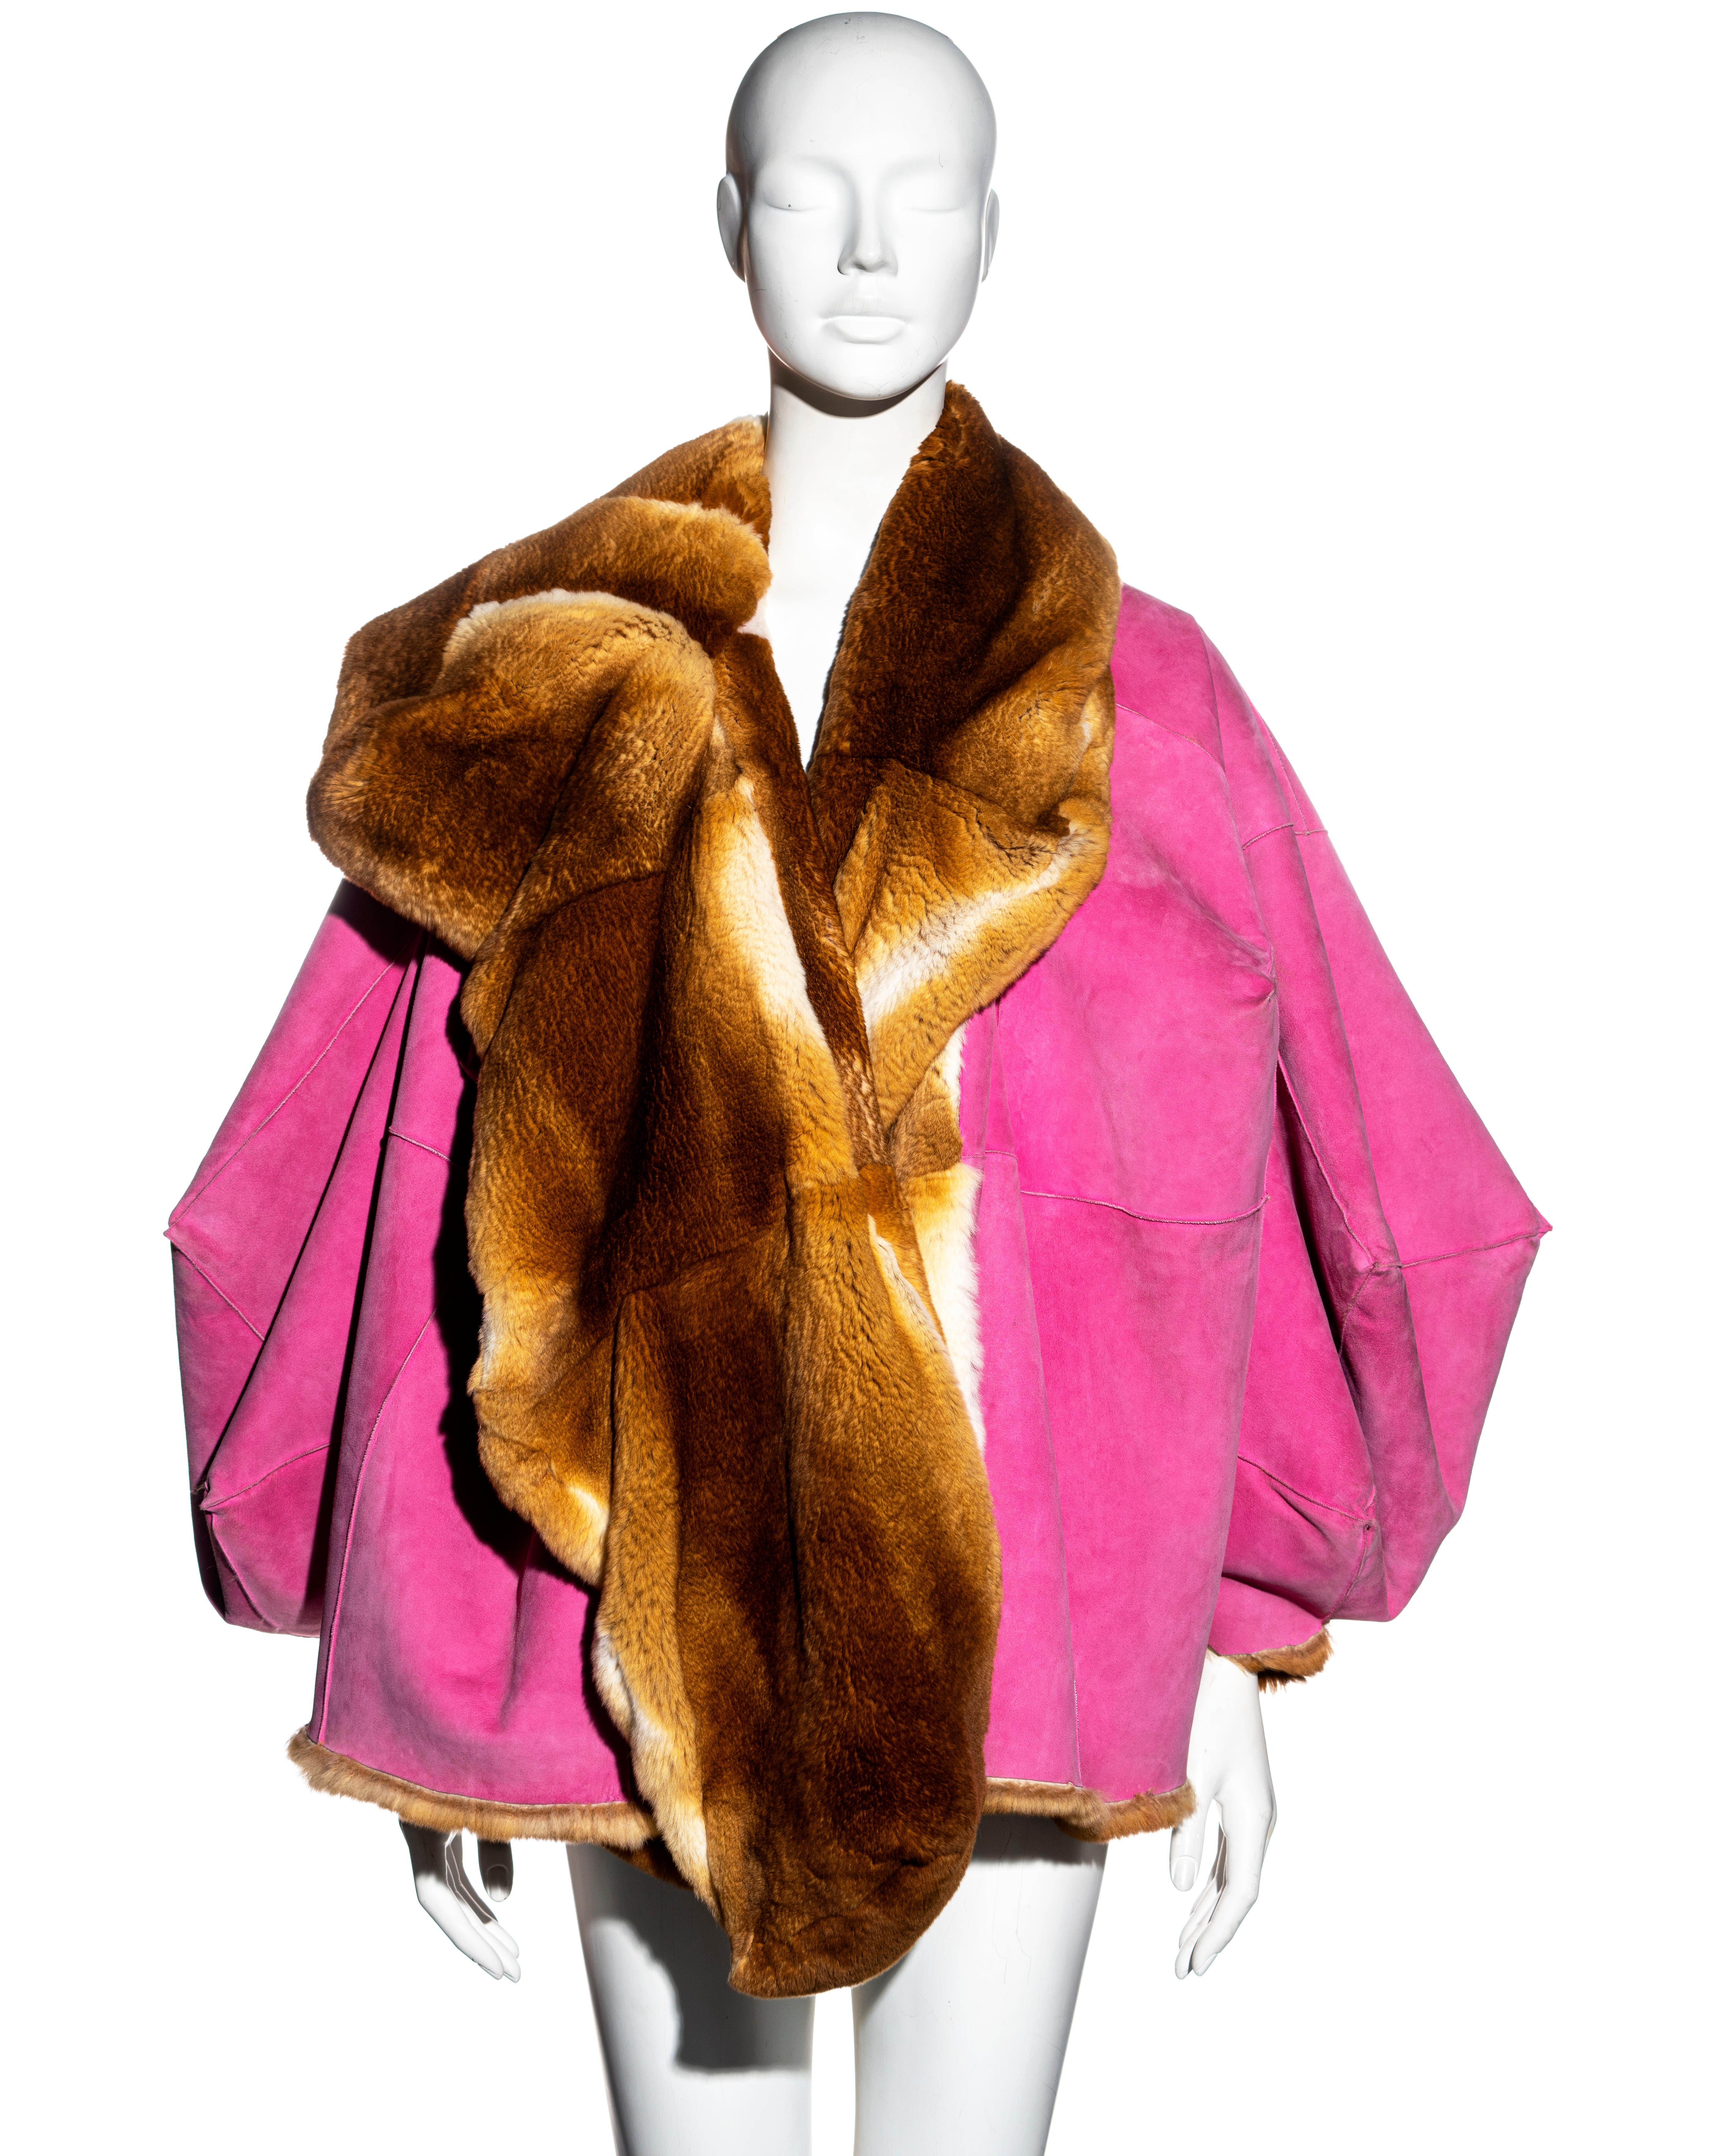 ▪ Christian Dior reversible pink and golden brown fur jacket 
▪ Designed by John Galliano 
▪ Oversized fit 
▪ Cube shaped sleeves
▪ Vibrant pink suede 
▪ Golden brown fur (origin unknown feels like Chinchilla) 
▪ Large collar 
▪ Two side pockets
▪